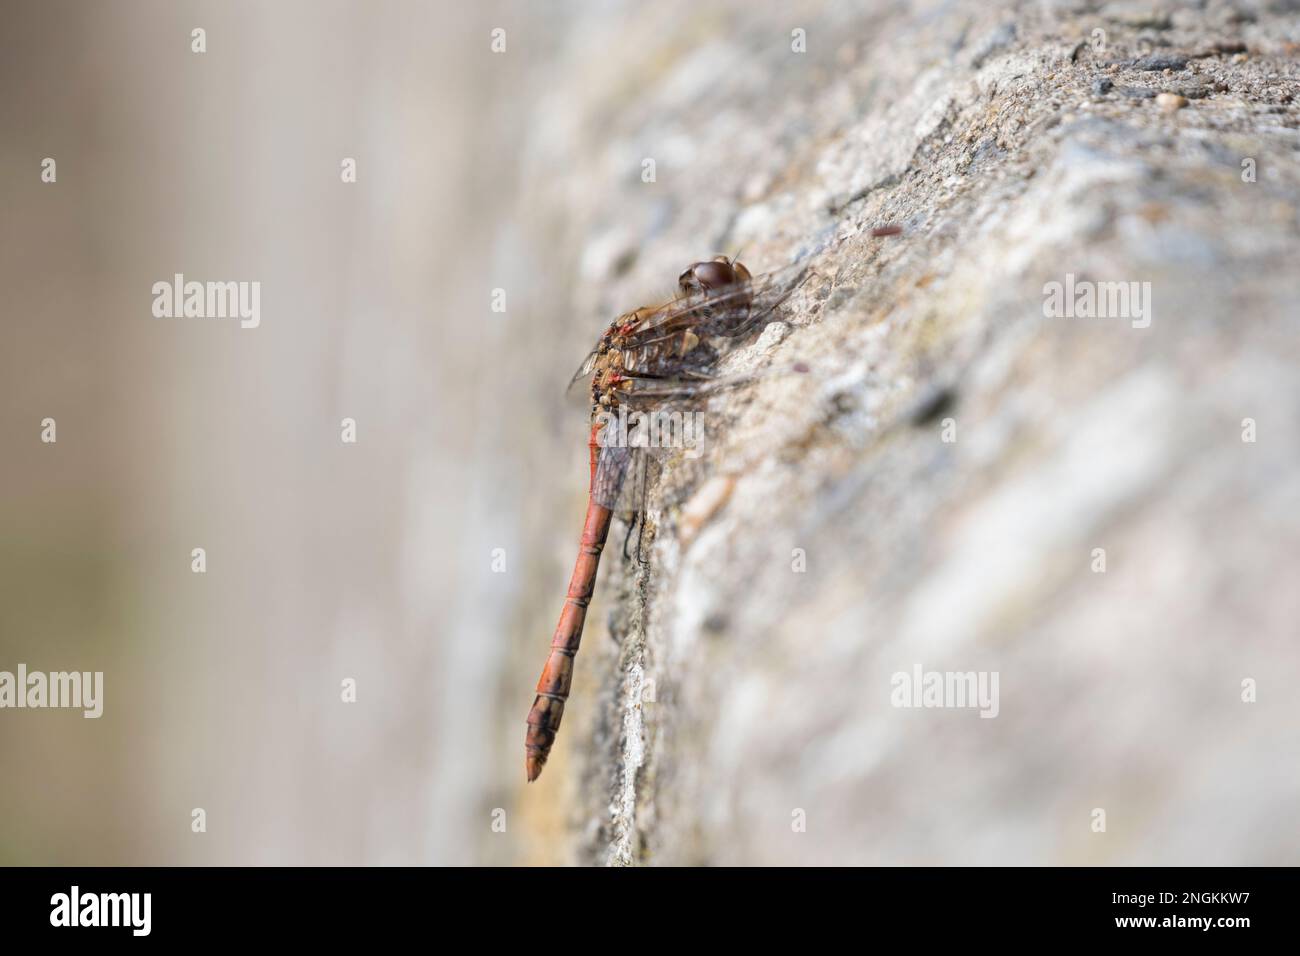 A red darter dragonfly (Sympetrum fonscolombii), perched on a stone wall. Stock Photo